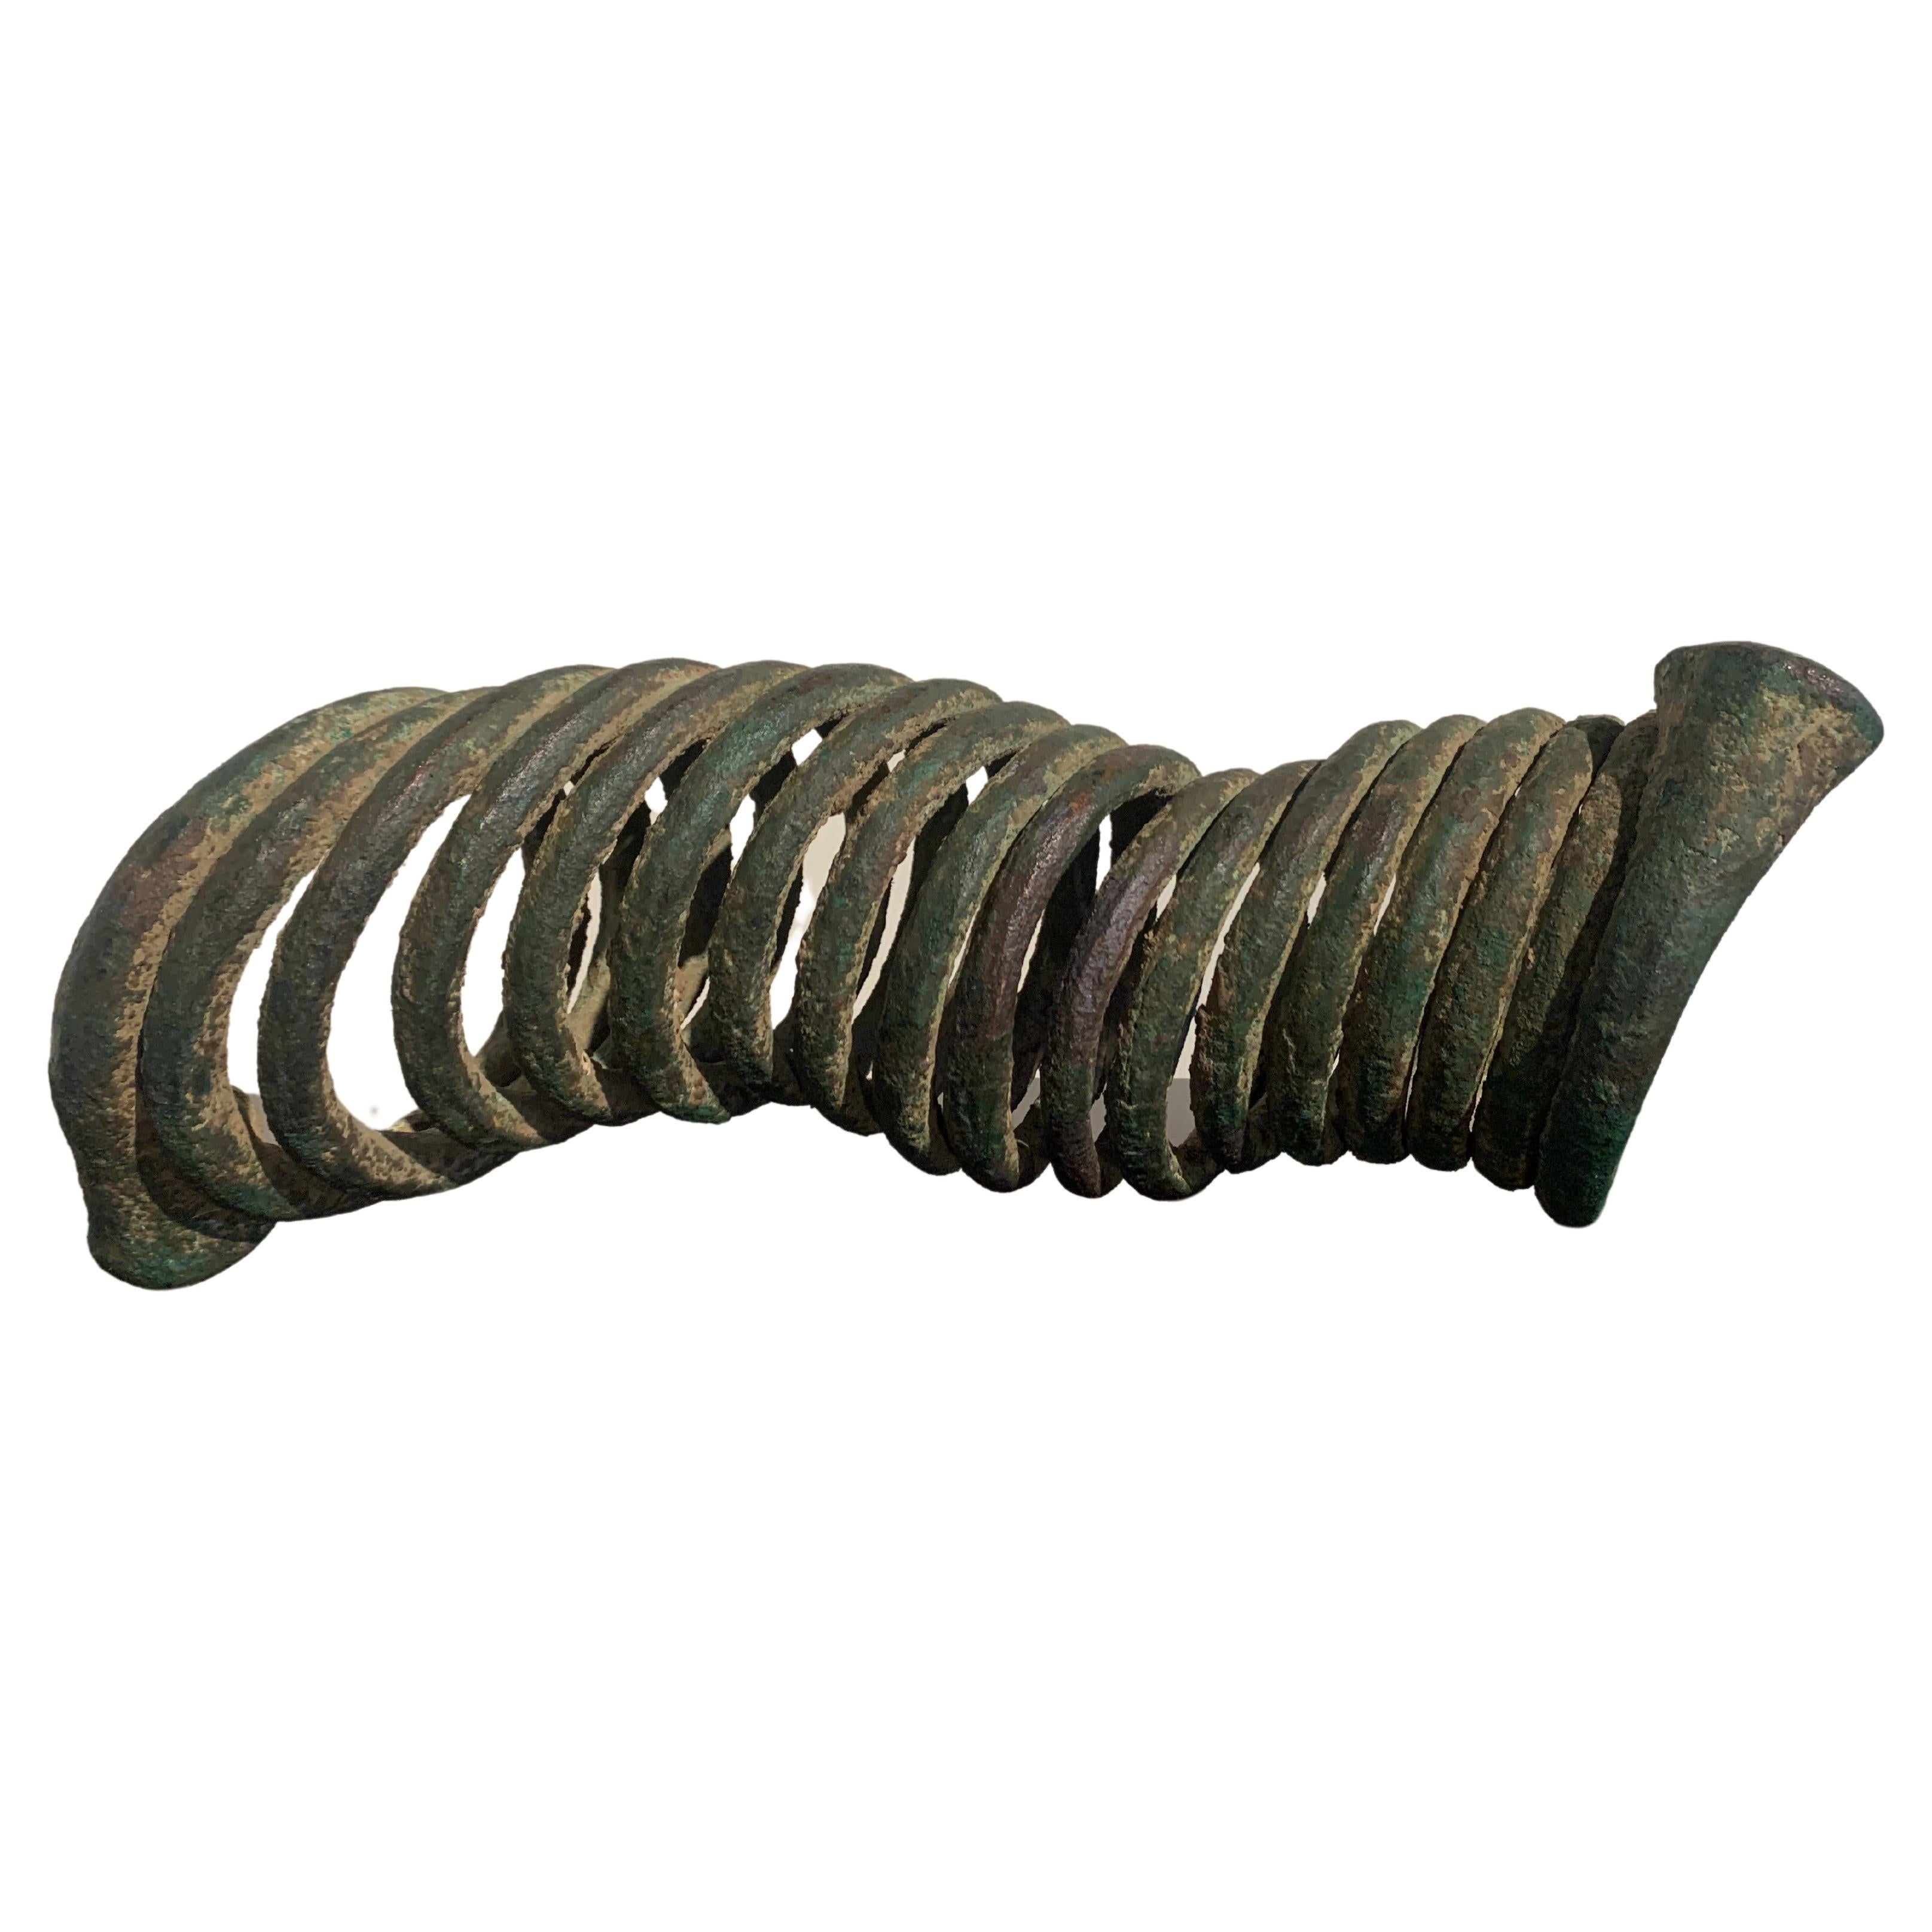 Large African Igbo Coiled Copper Manilla Currency, Early 20th Century, Nigeria